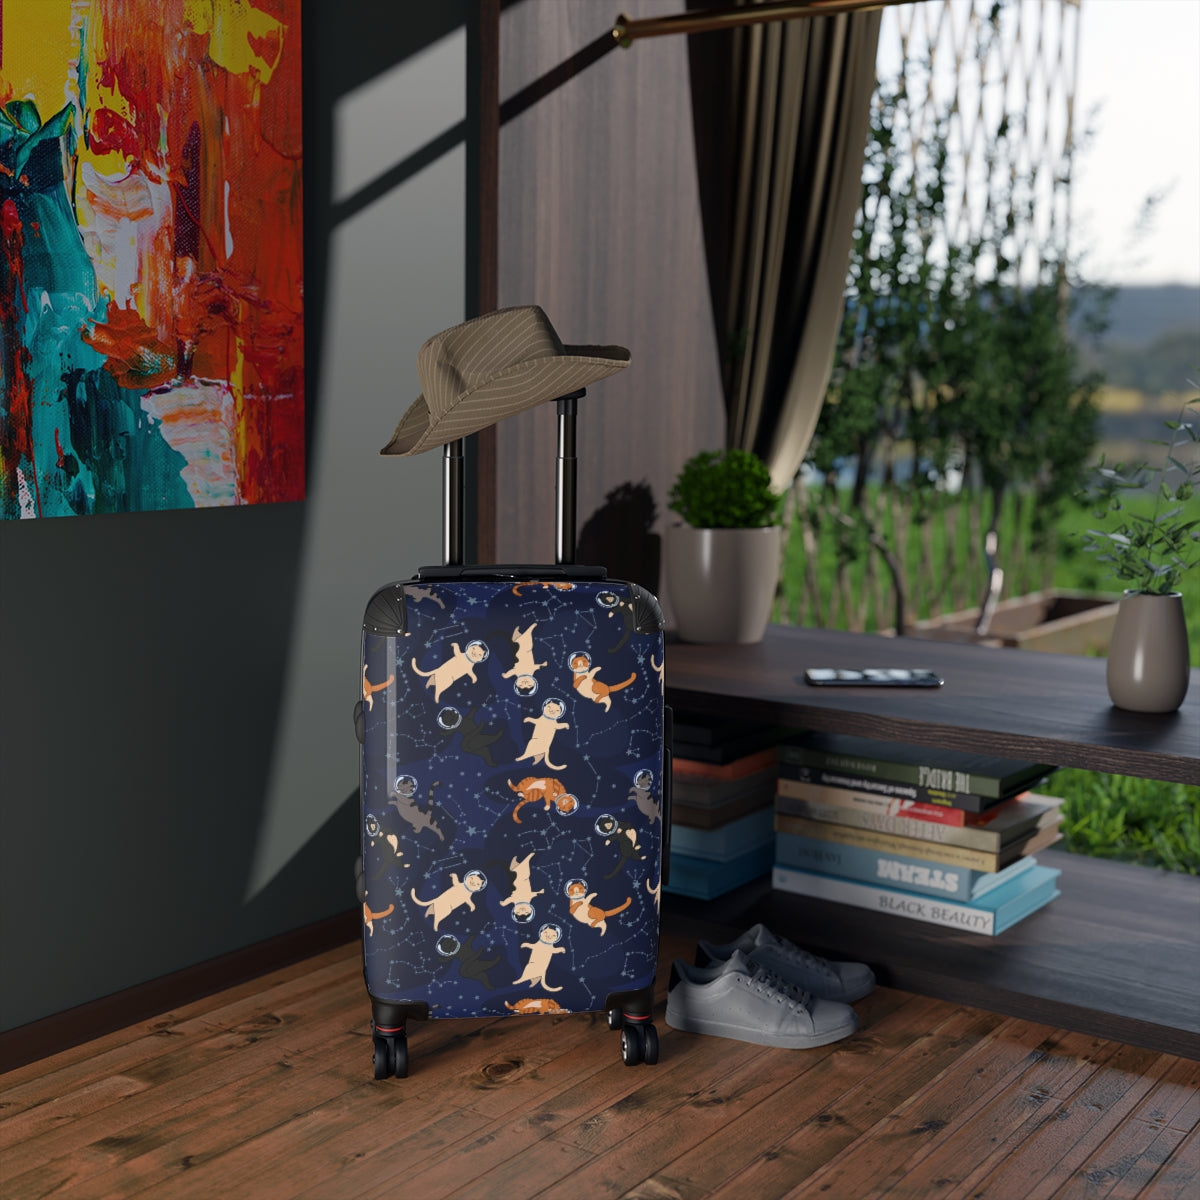 Cats in Space Cabin Suitcase Luggage, Constellation Cute Carry On Travel Small Large Rolling Spinner Wheels Designer Hard Shell Case Starcove Fashion